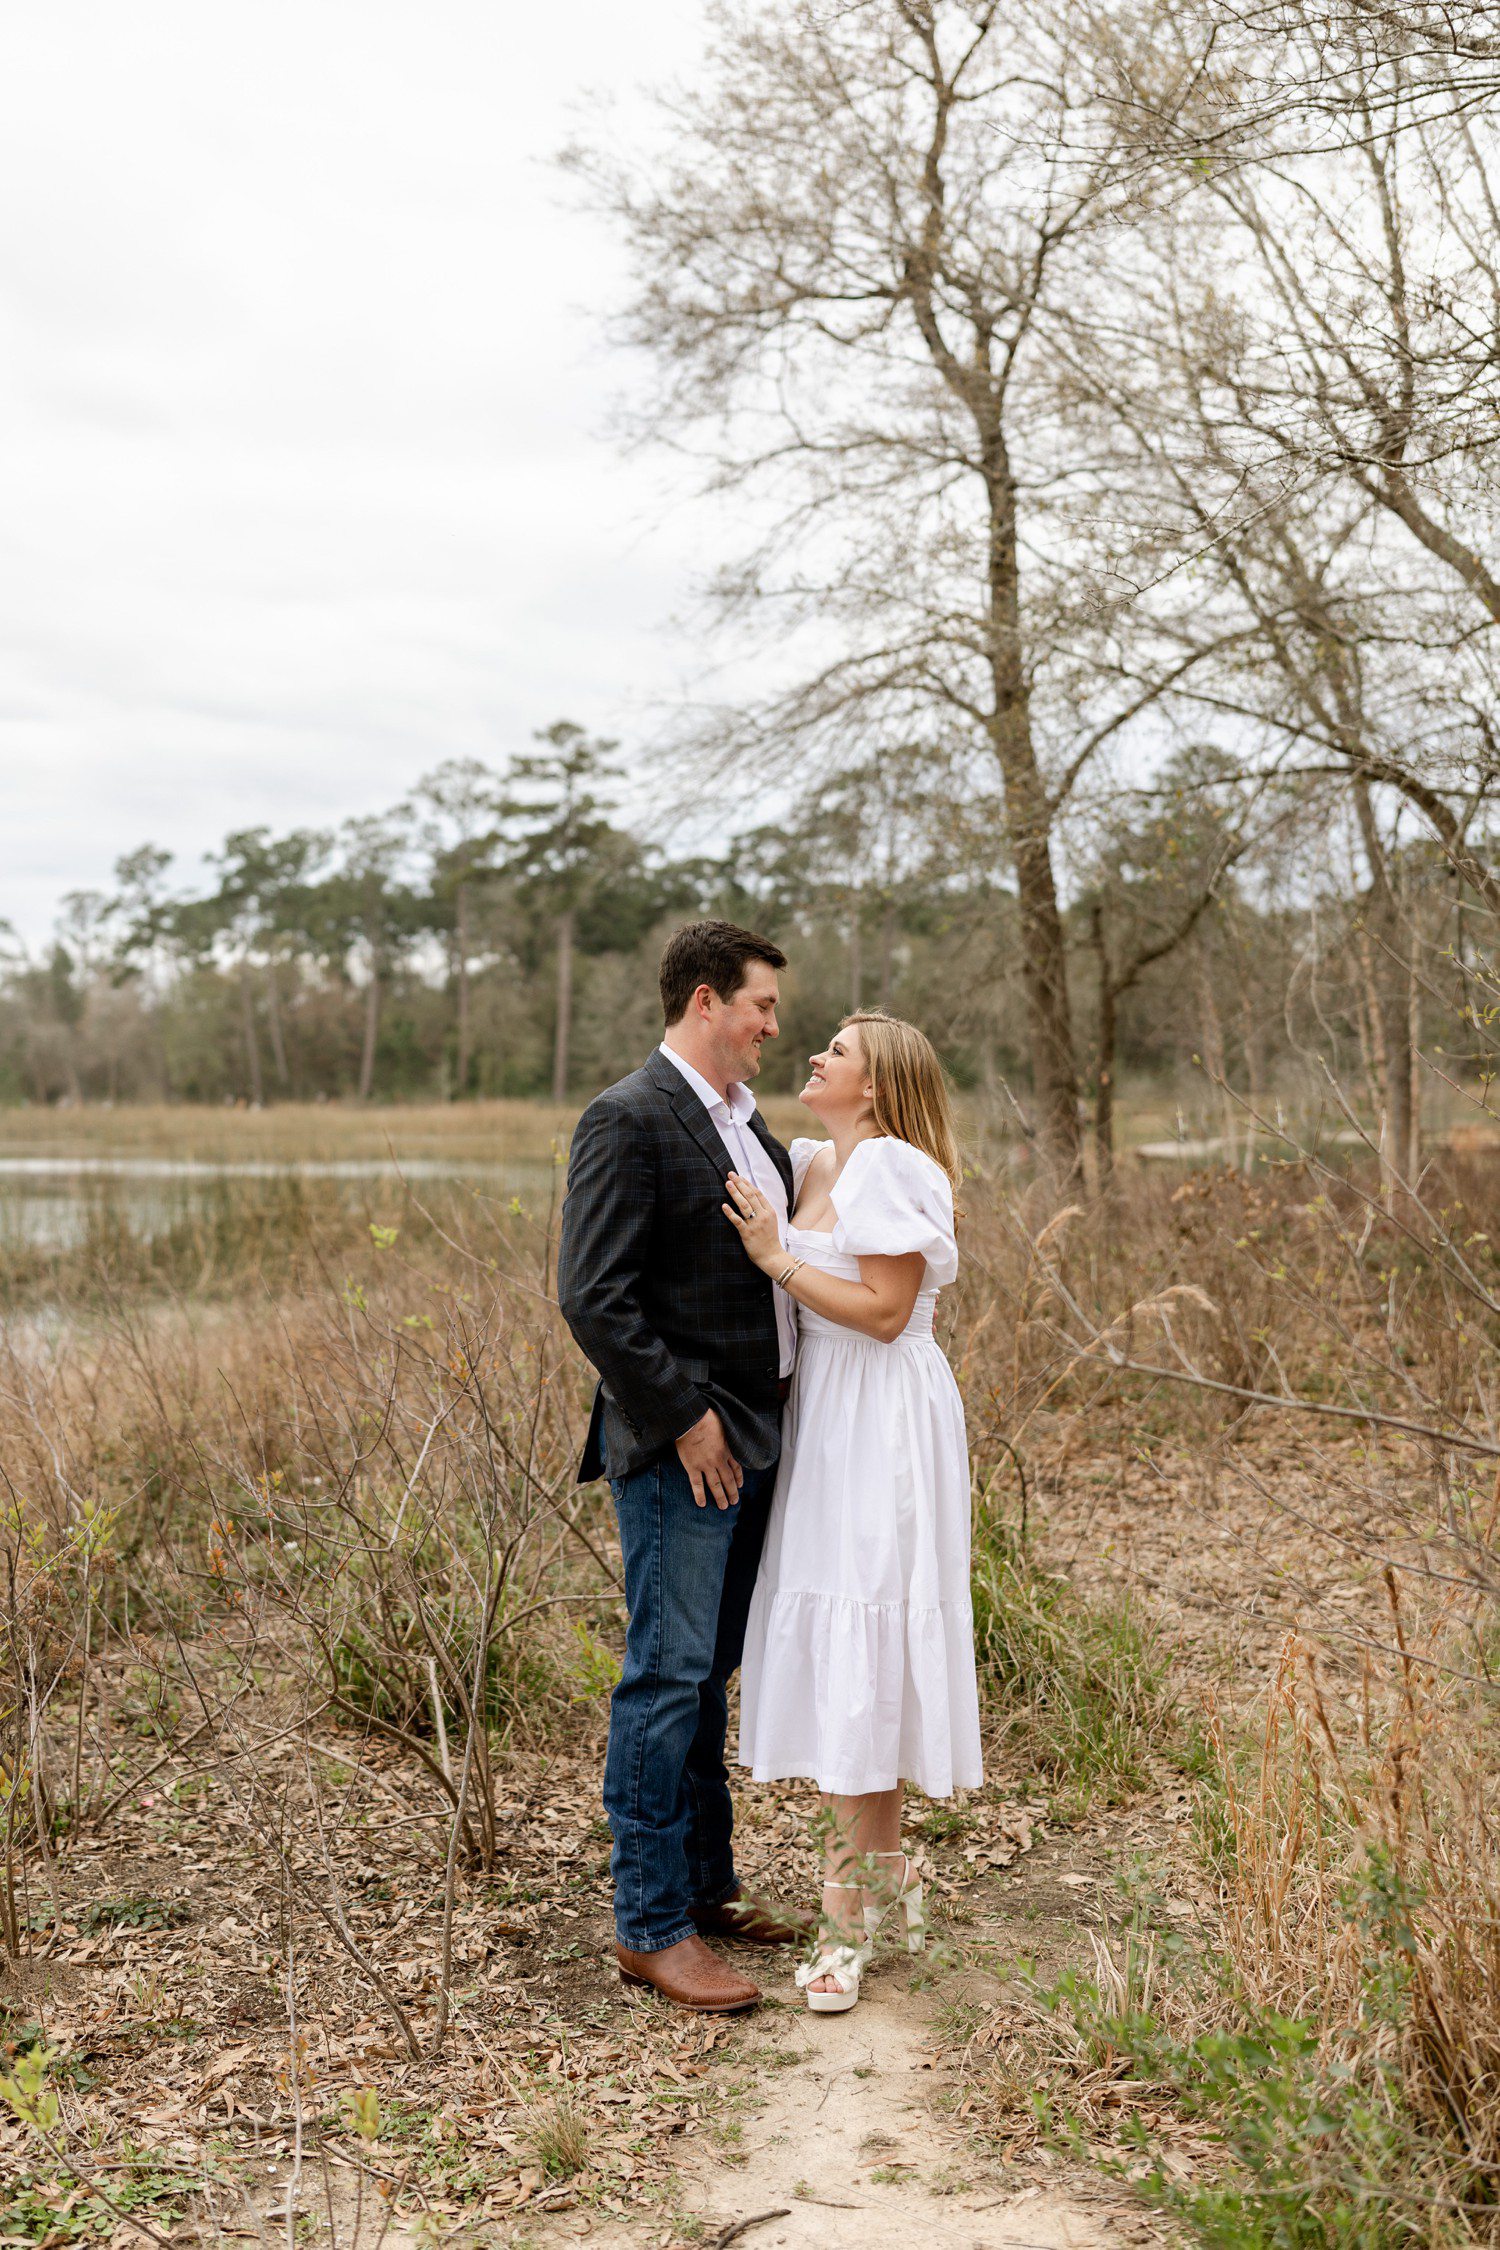 Engagement Photos at Eastern Glades in Memorial Park Houston 